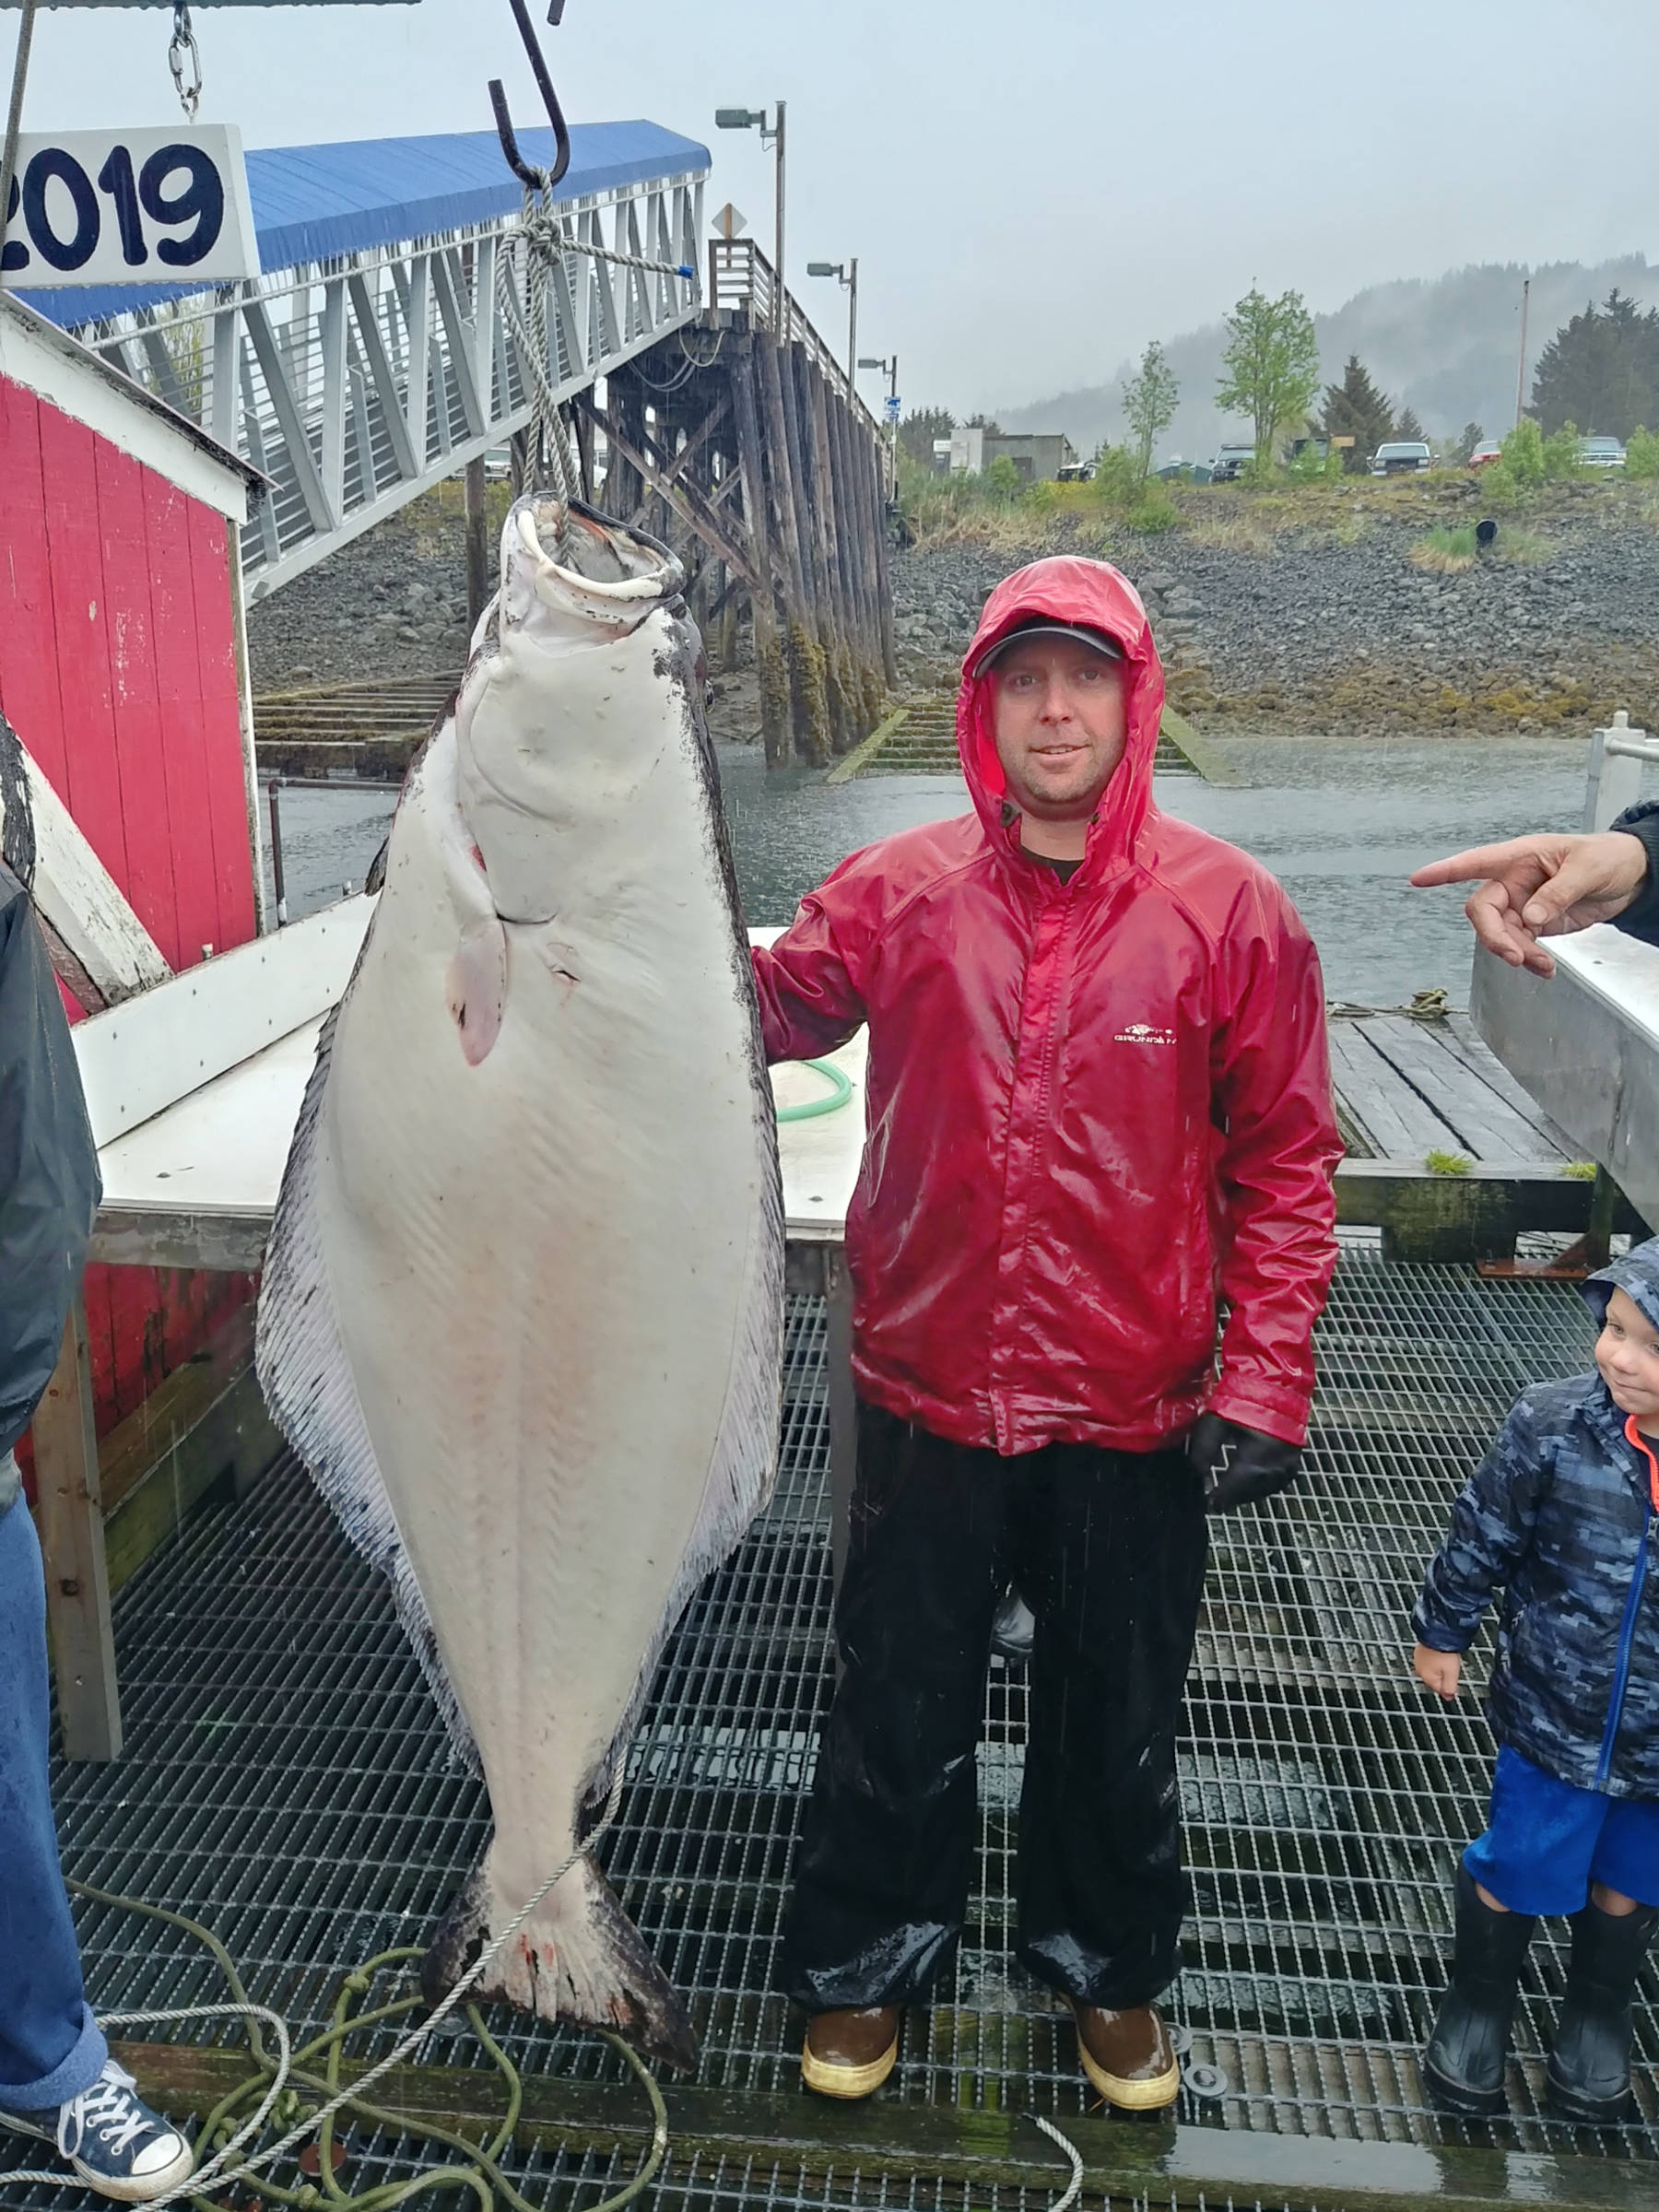 Steve Pollack IV poses on May 26, 2019, with a 133-pound halibut, the largest halibut caught in the Seldovia Human Powered Fishing Derby held in Seldovia, Alaska, over the Memorial Day weekend. Pollack caught the halibut fishing from a 13-foot rowboat. (Photo provided)